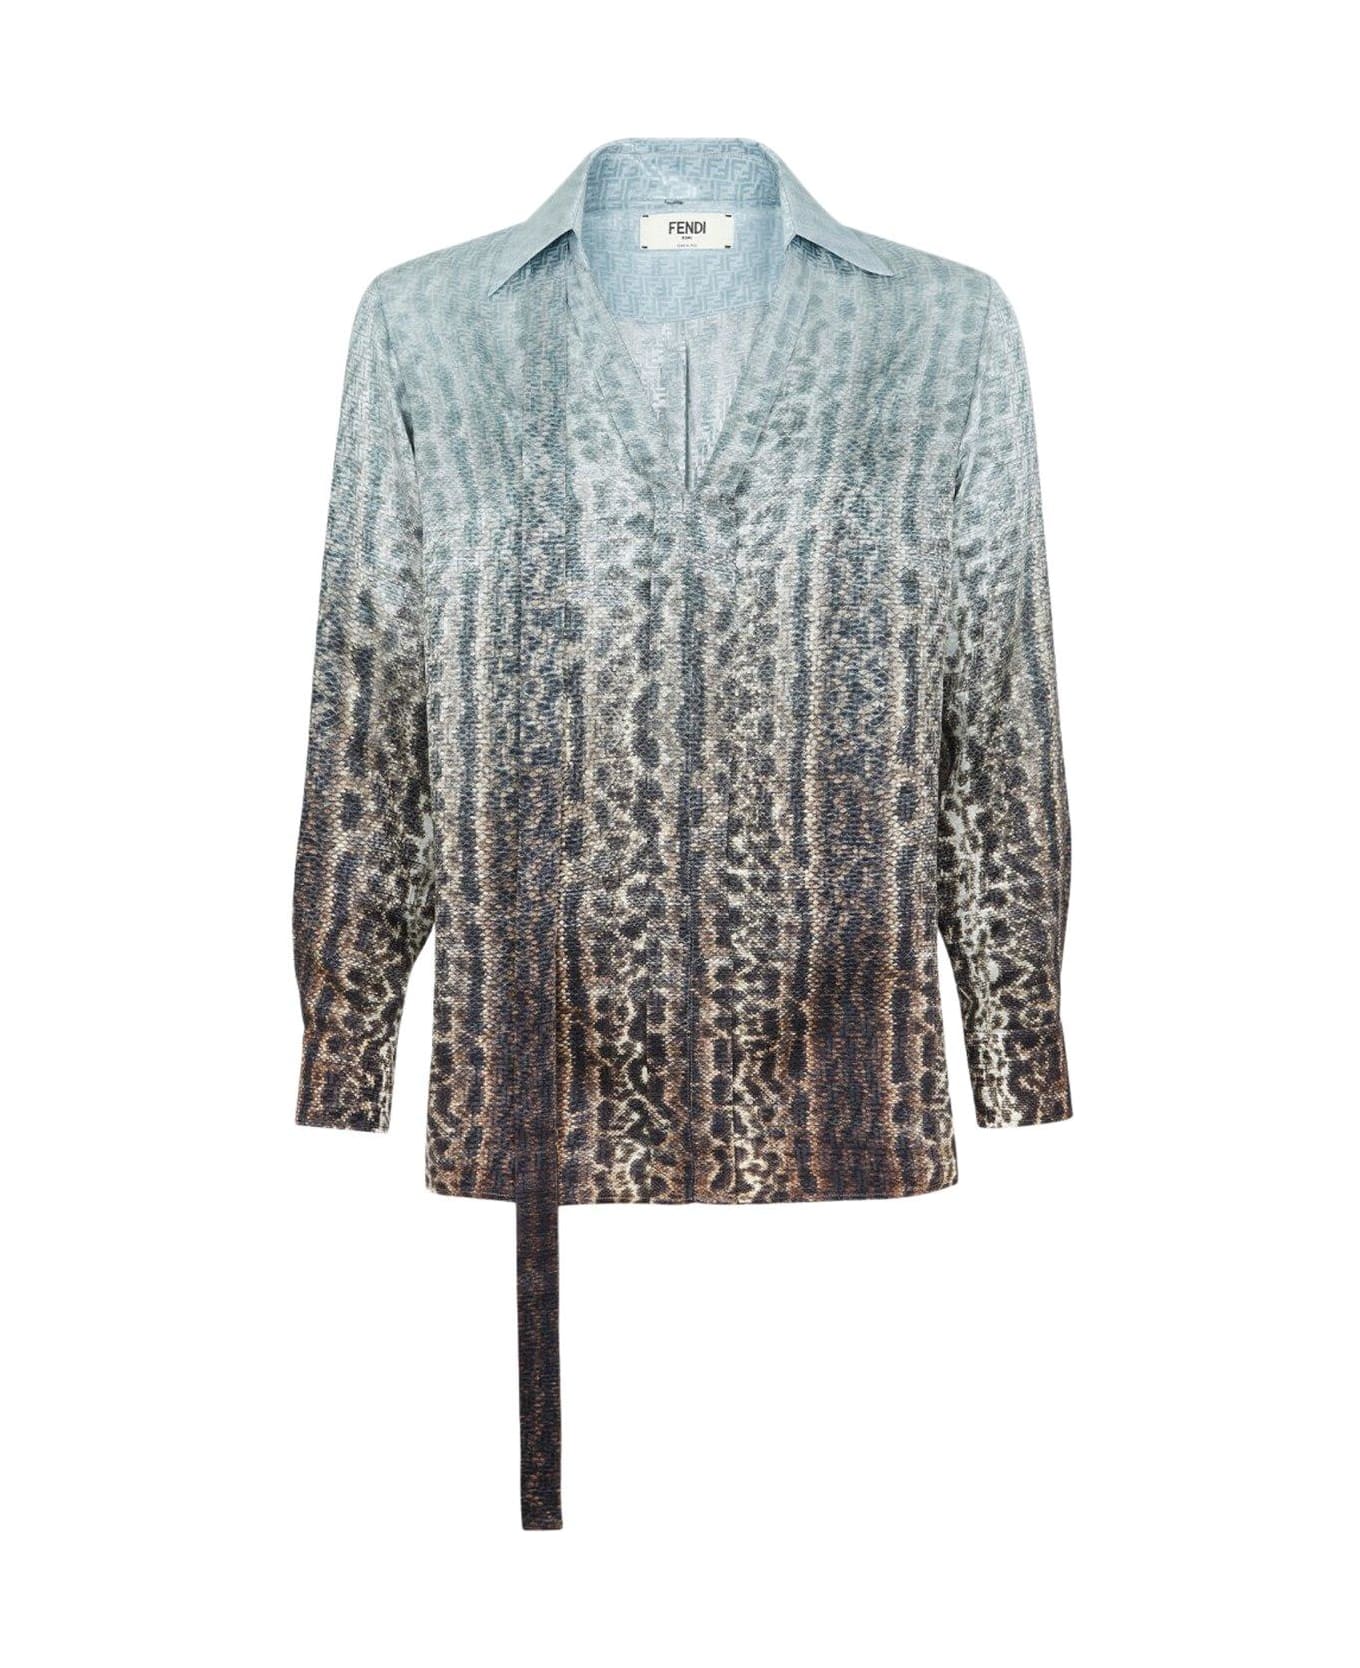 Fendi All-over Printed Sleeved Blouse - Clear Blue